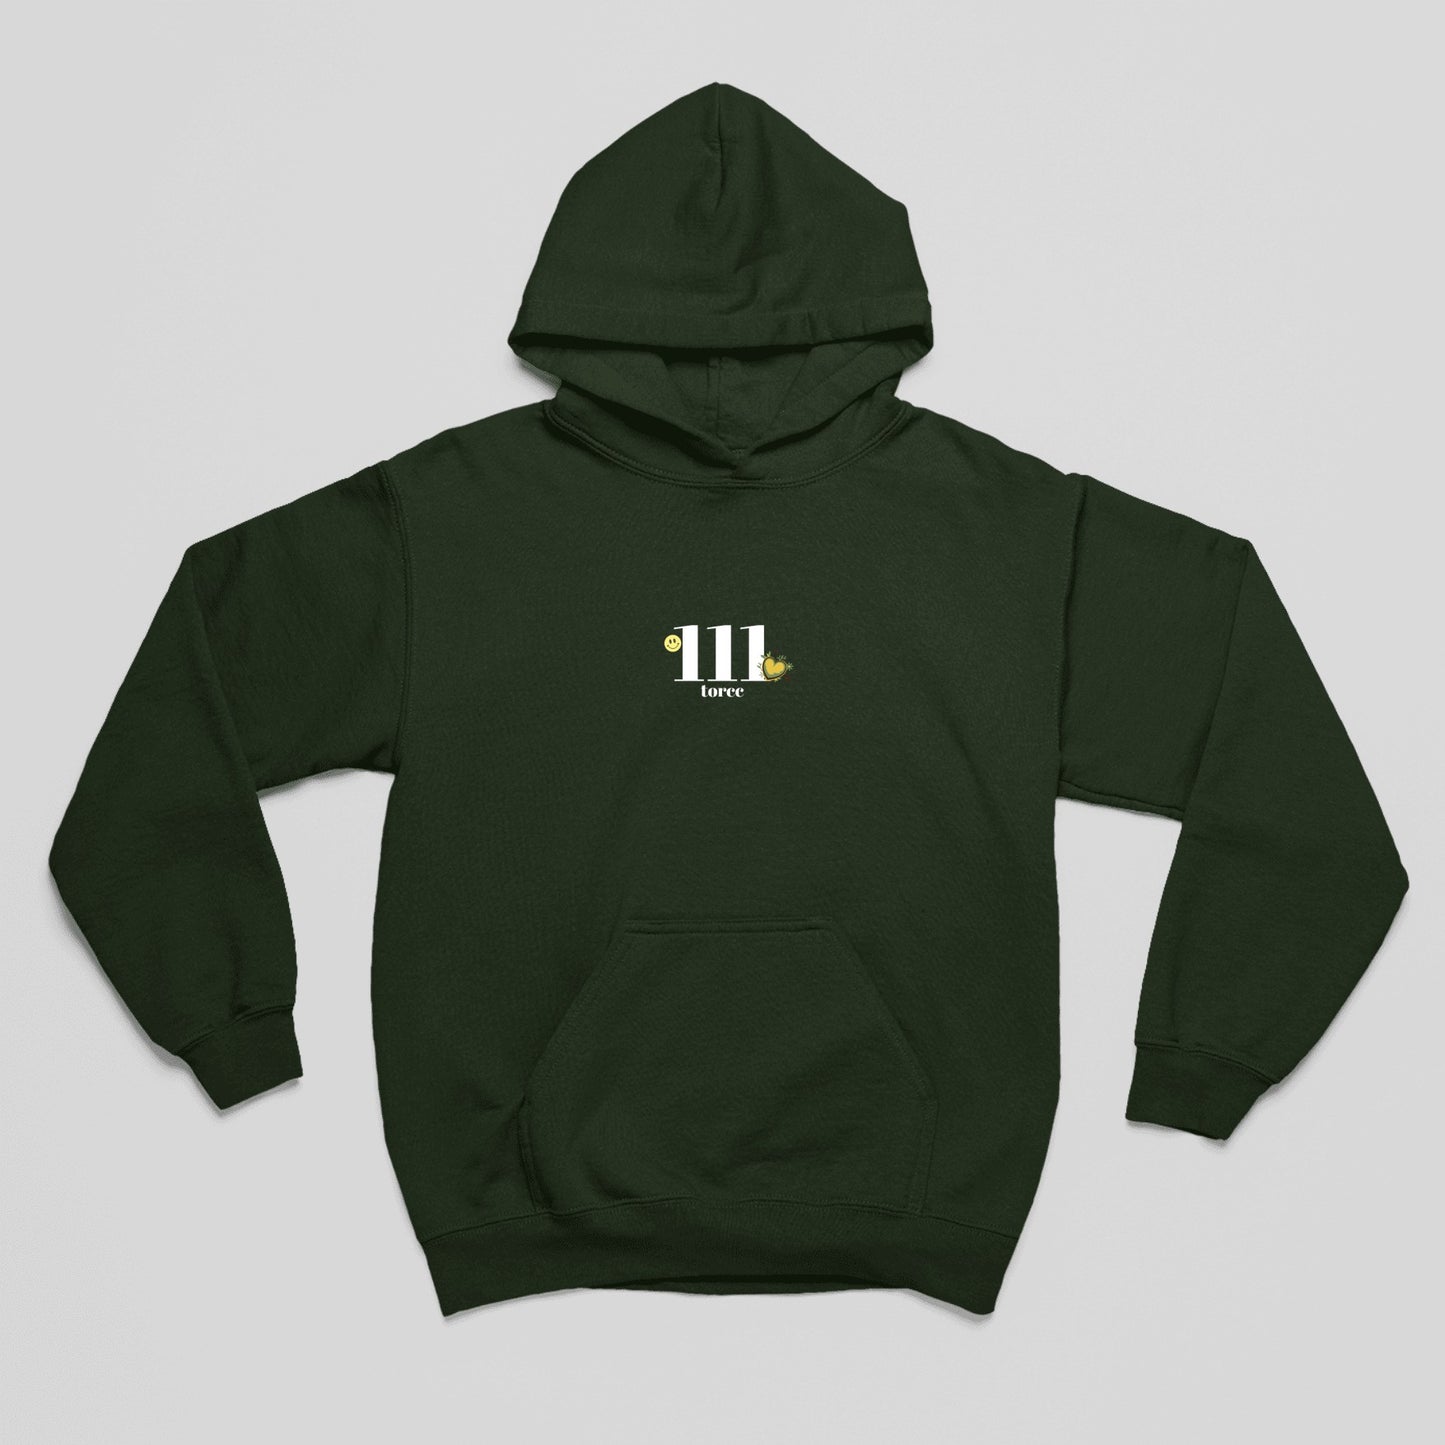 Forest Green Listen To Your Heart: Graphic Hoodie For Men and Womenoversized tshirt for men, oversized tshirt for women, graphic oversized tshirt, streetwear oversized tshirt, oversized tshirt, oversized tee, hoodies for men, hoodies for women, hoodies on sale, hoodies on sale india, hoodies men